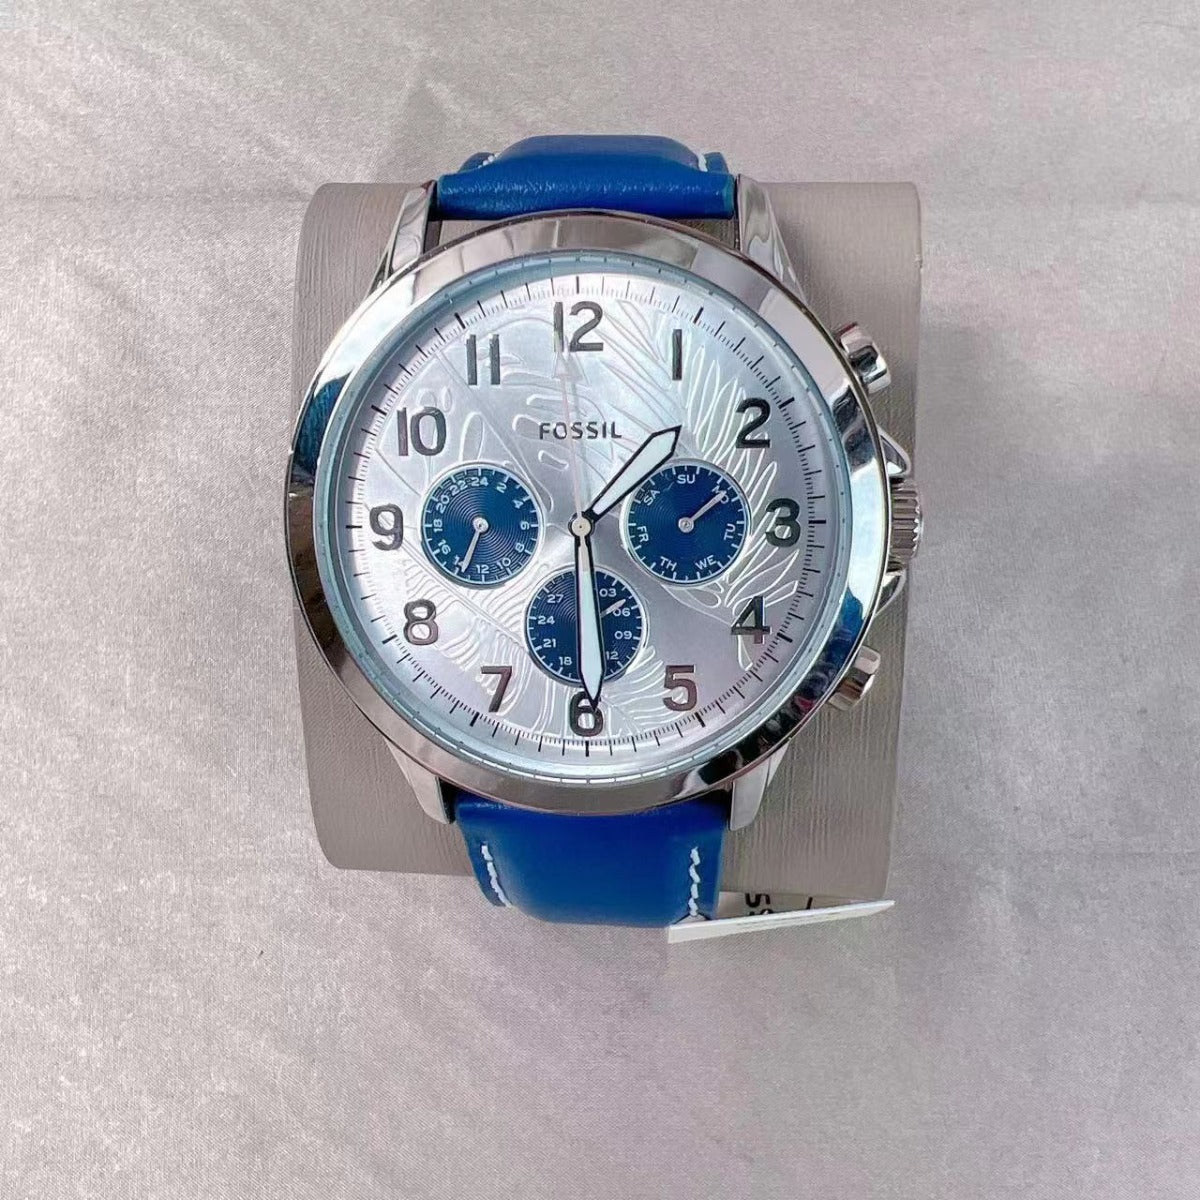 Fossil BQ2695 Multifunction Blue Leather Watch 796483574120